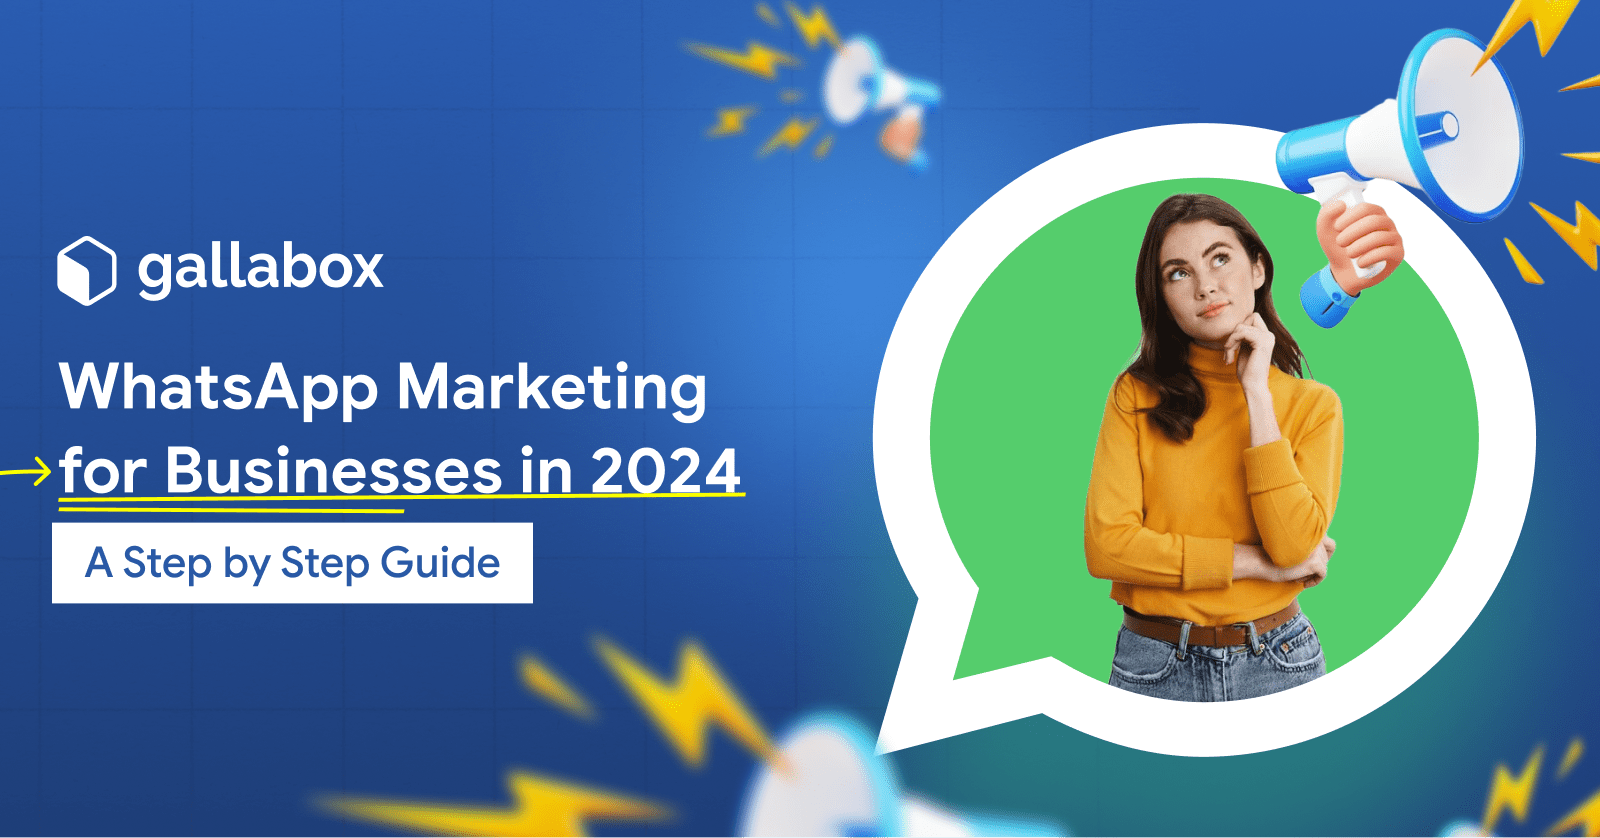 WhatsApp Marketing for Businesses in 2024: How to Get Started